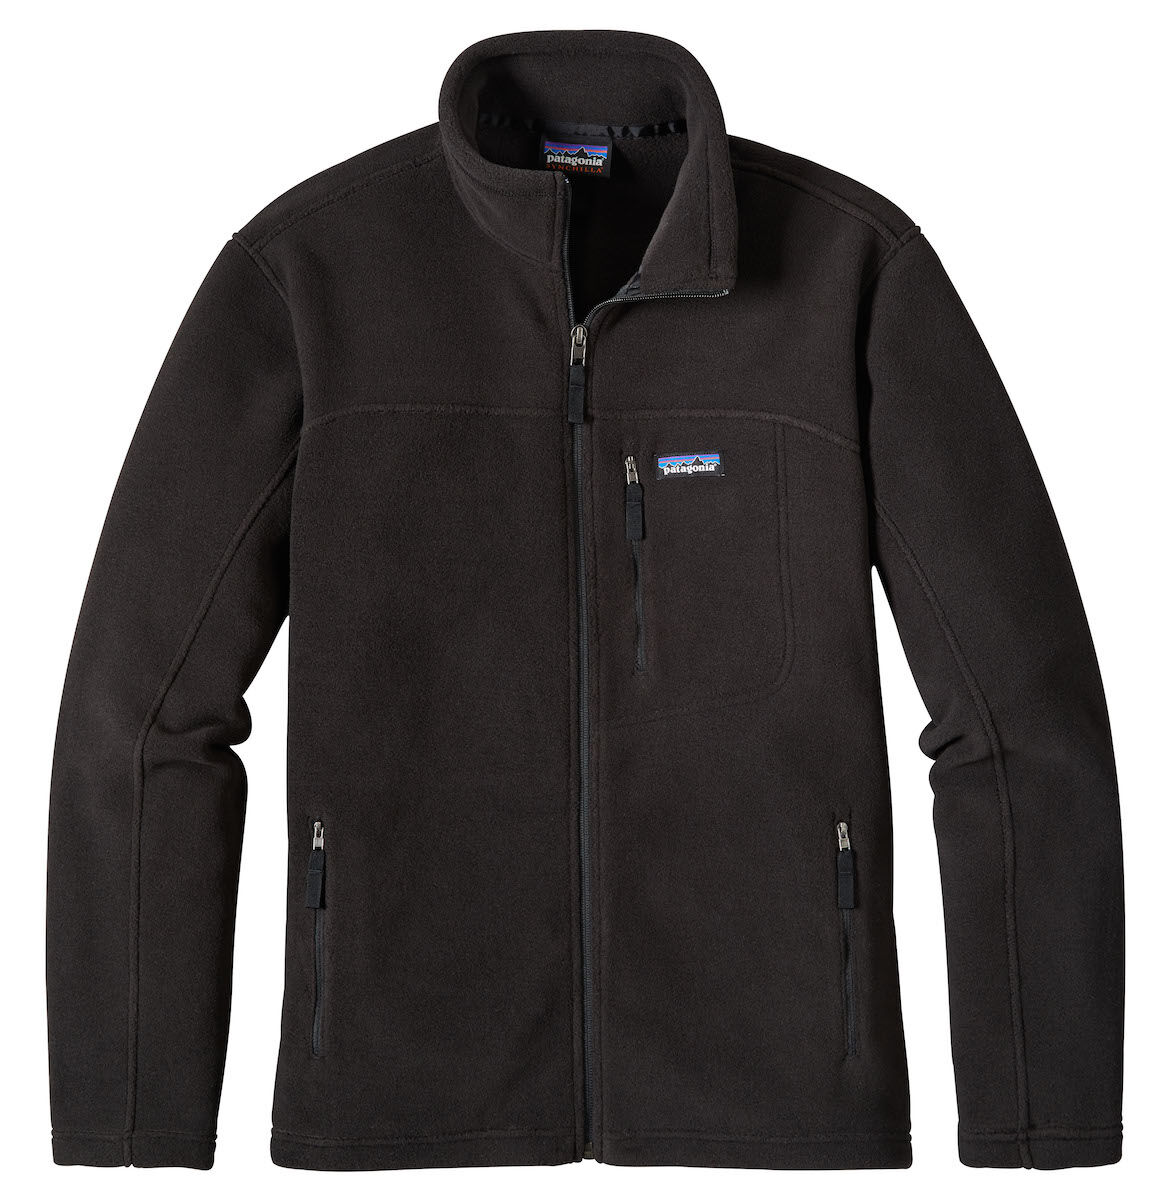 Patagonia - Classic Synchilla® Fleece Jacket - Giacca in pile - Uomo